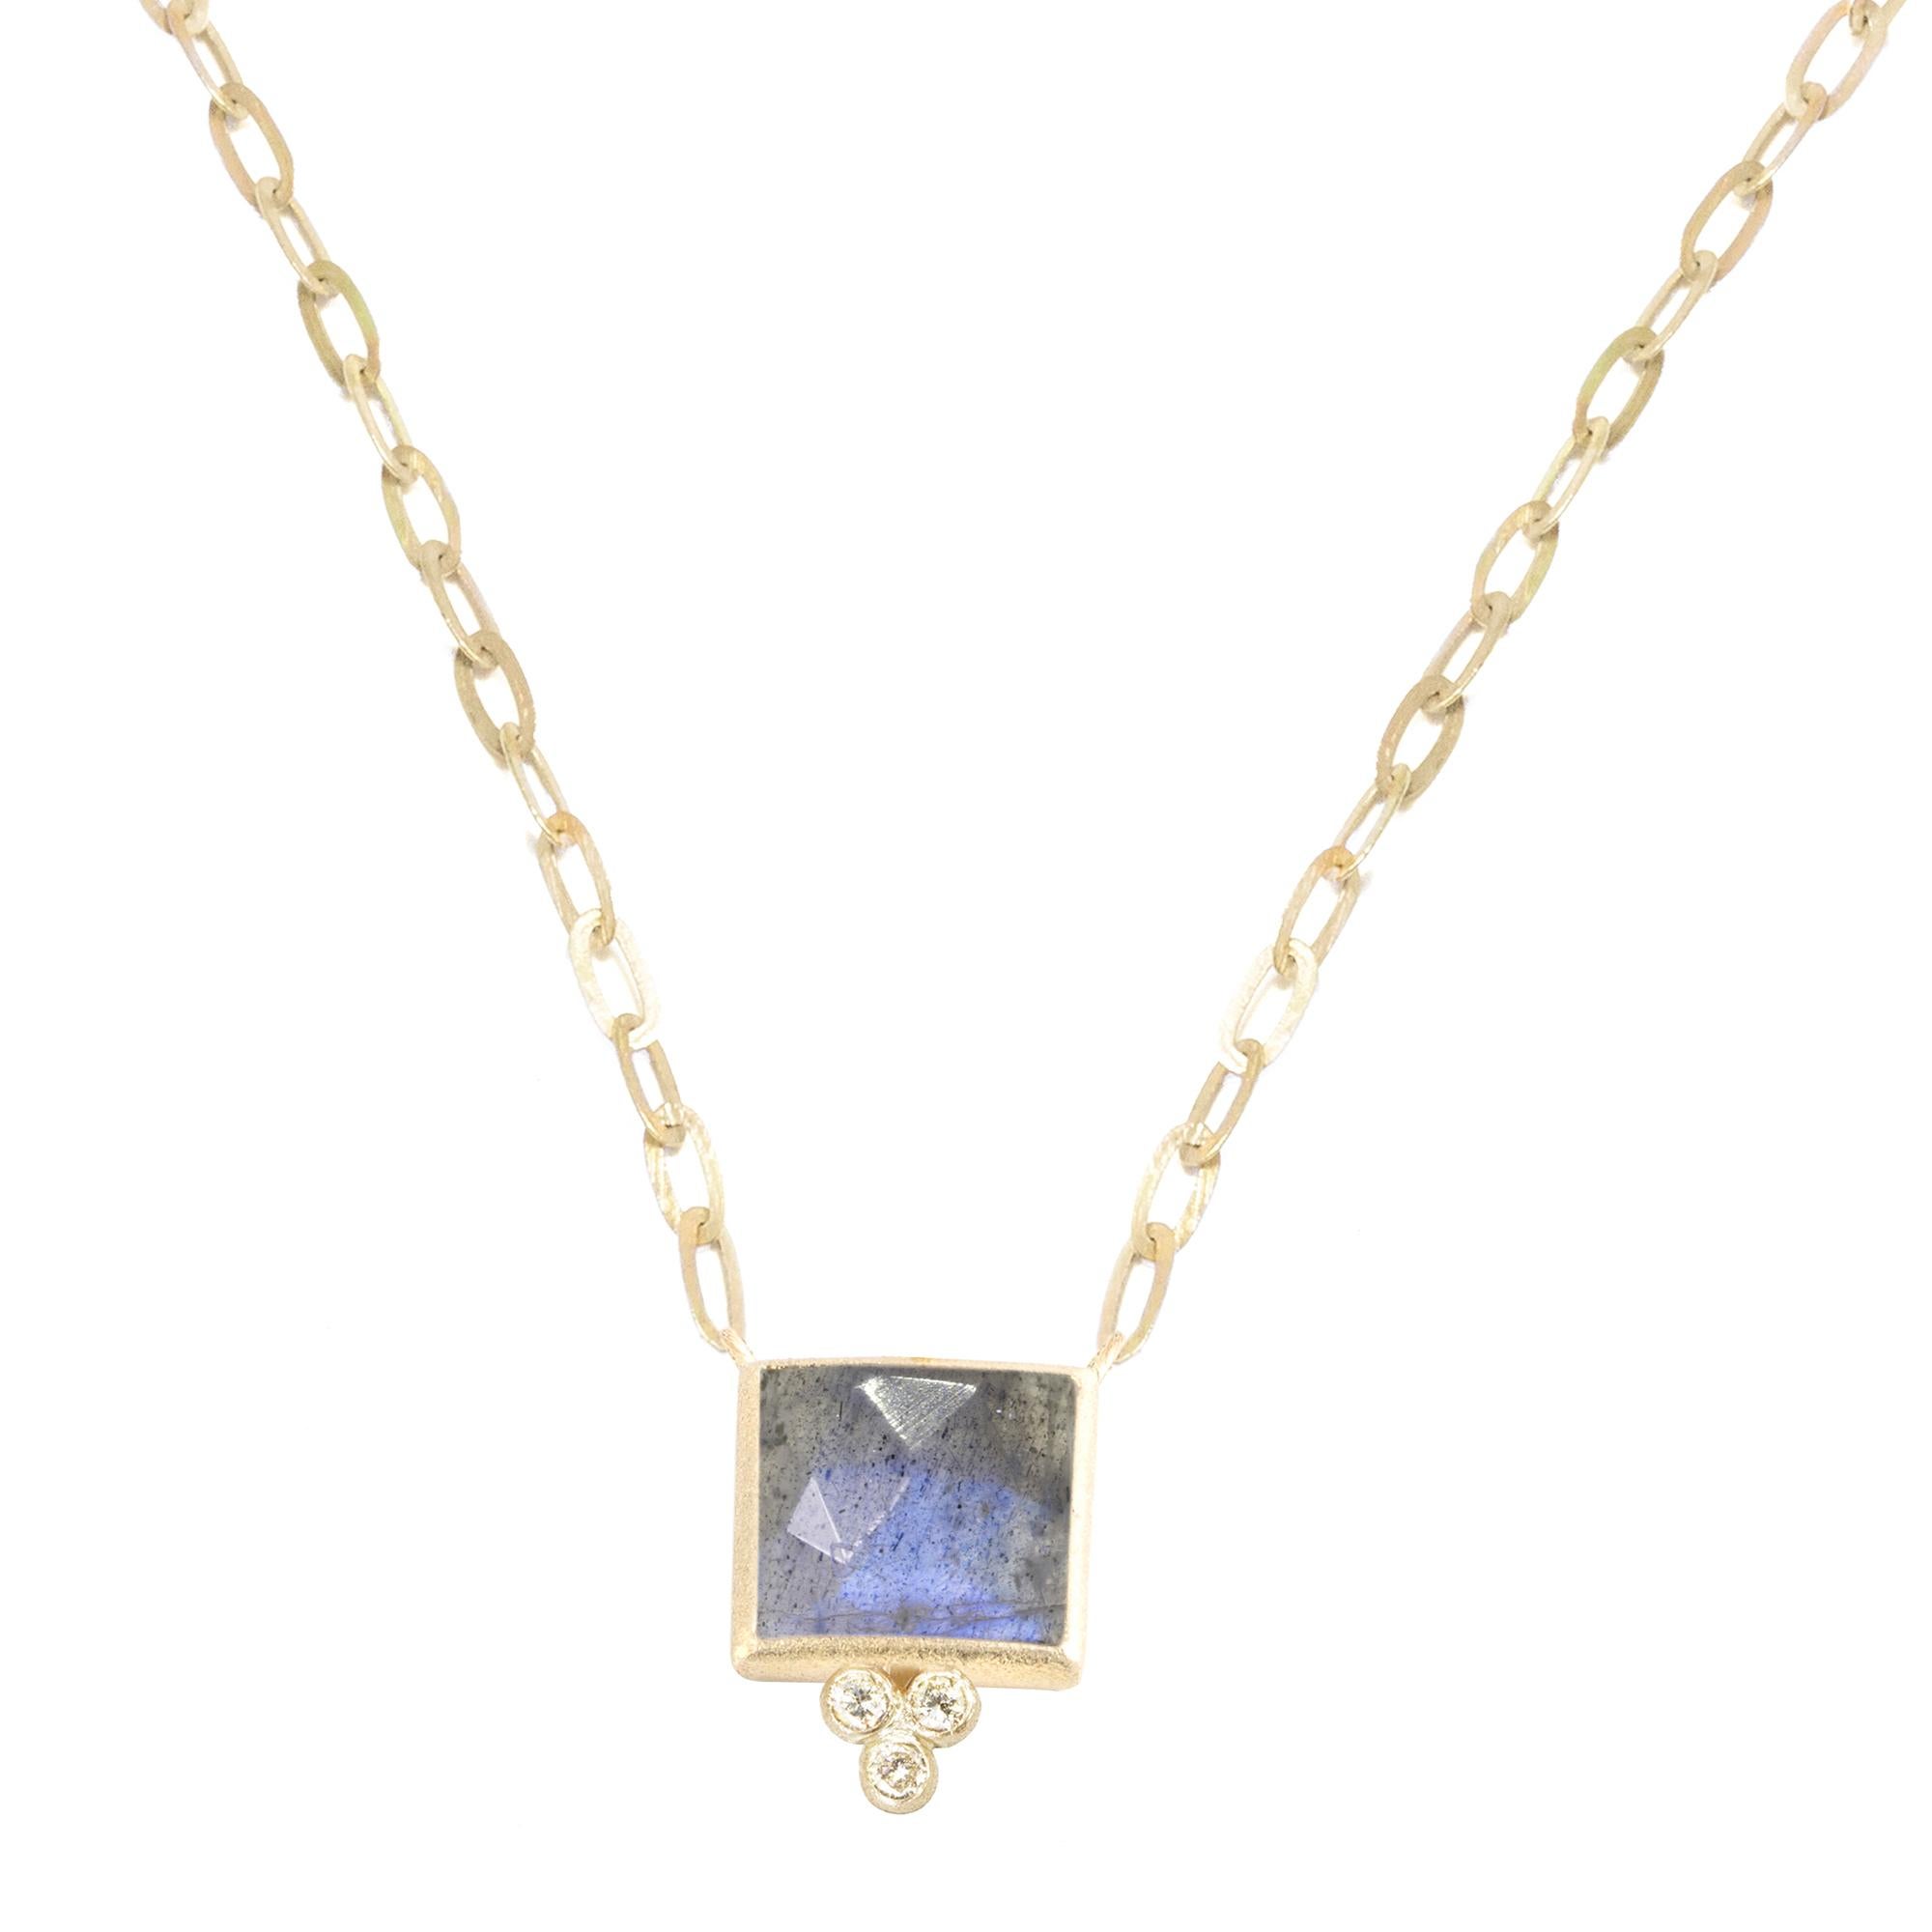 Square dance: Designed with hand-faceted labradorite in a textured gold bezel on a delicate link chain, our diamond-accented Ariana Gold Necklace can be worn on its own o layered with other styles.

Metal: 18K Yellow Gold
Stone carat: 4.2
Diamond